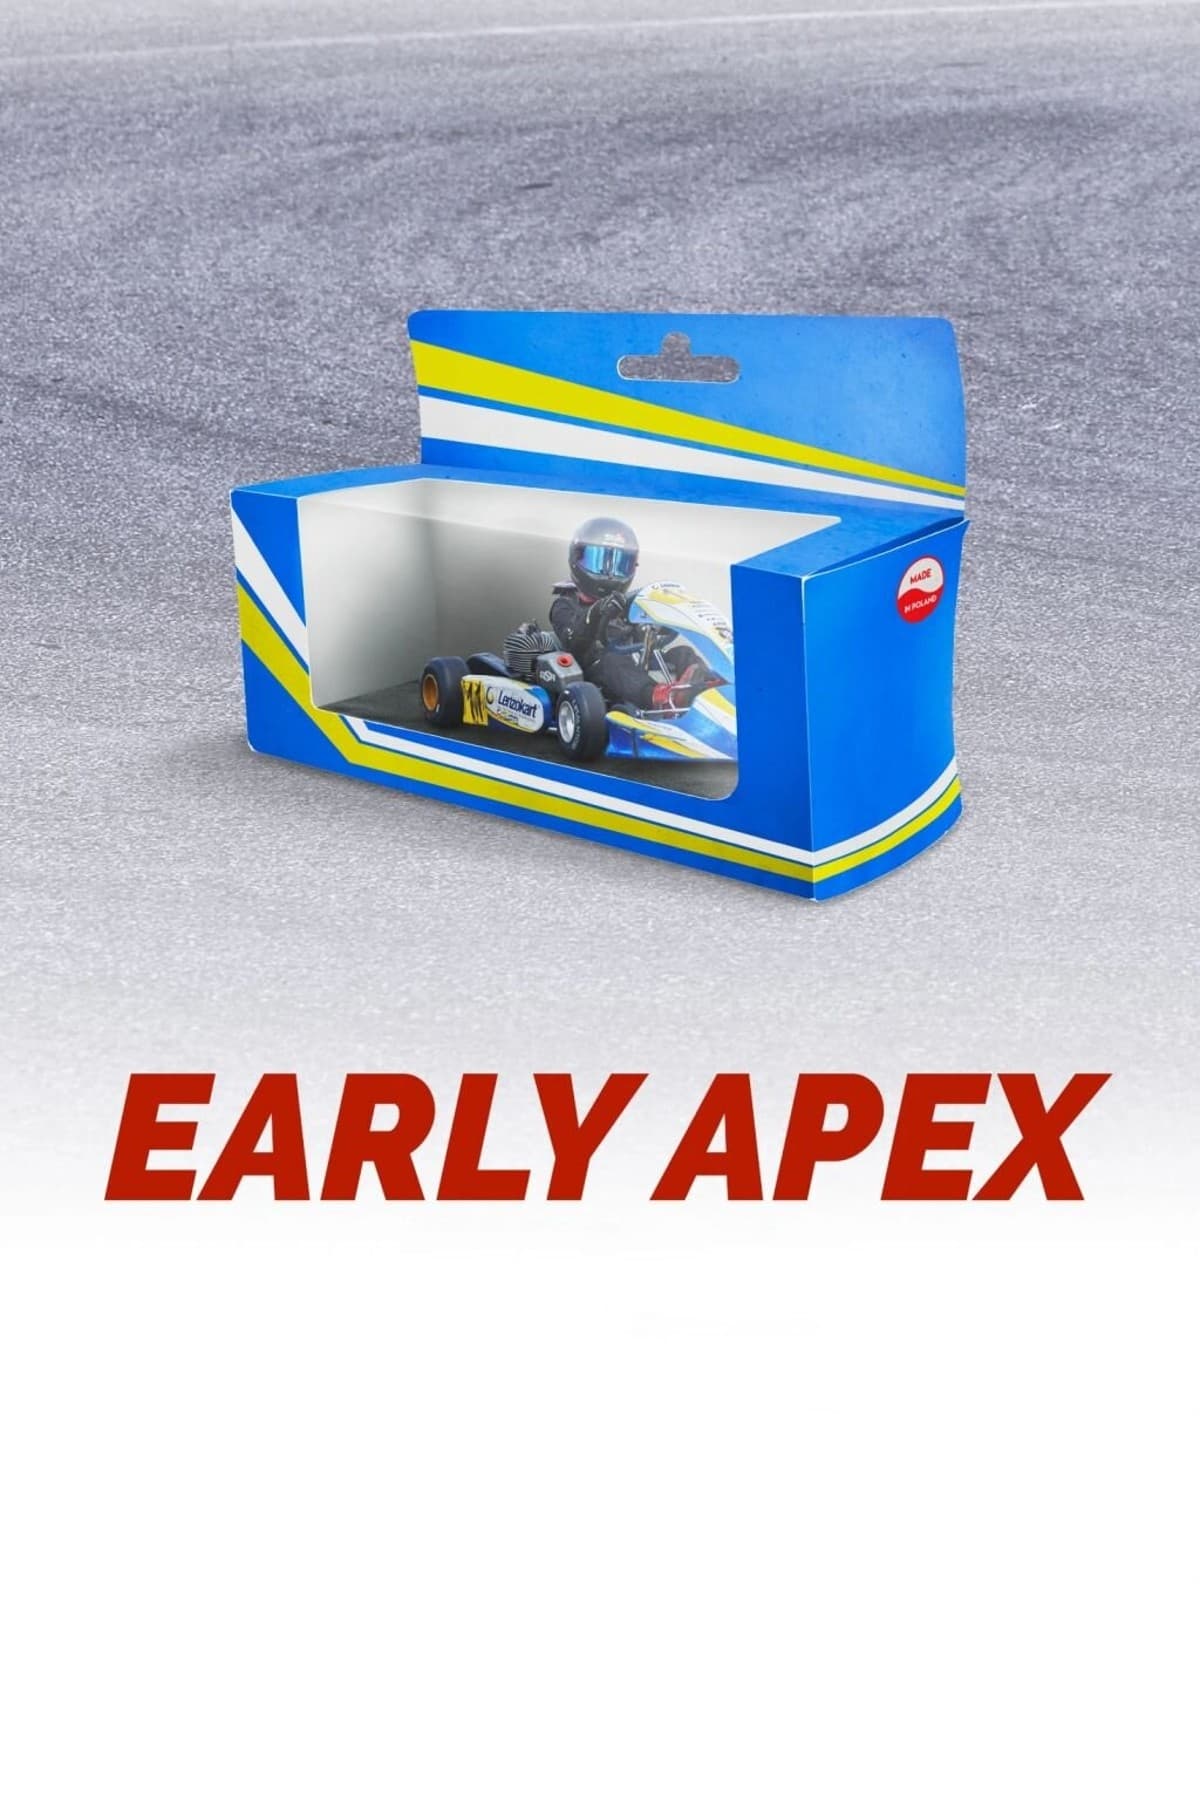 Early Apex